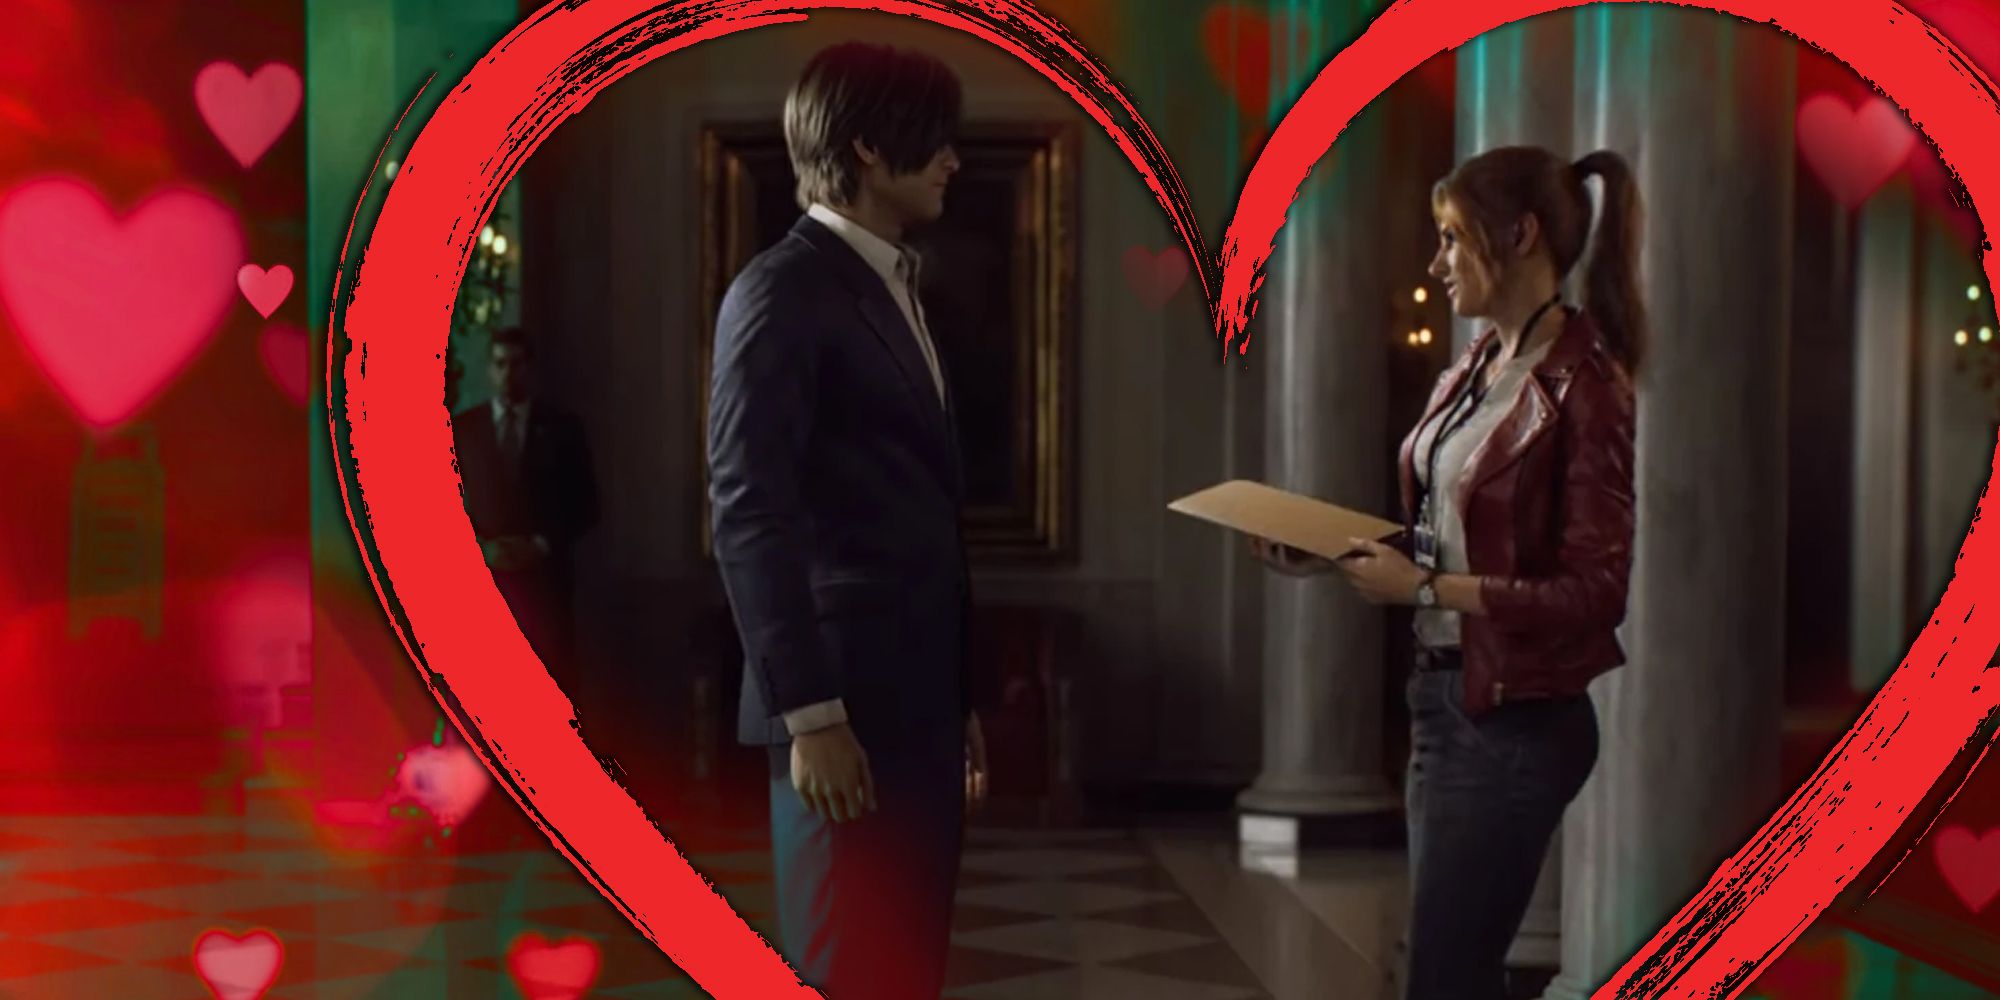 Claire Redfield and Leon Kennedy from Resident Evil: Infinite Darkness standing inside a heart